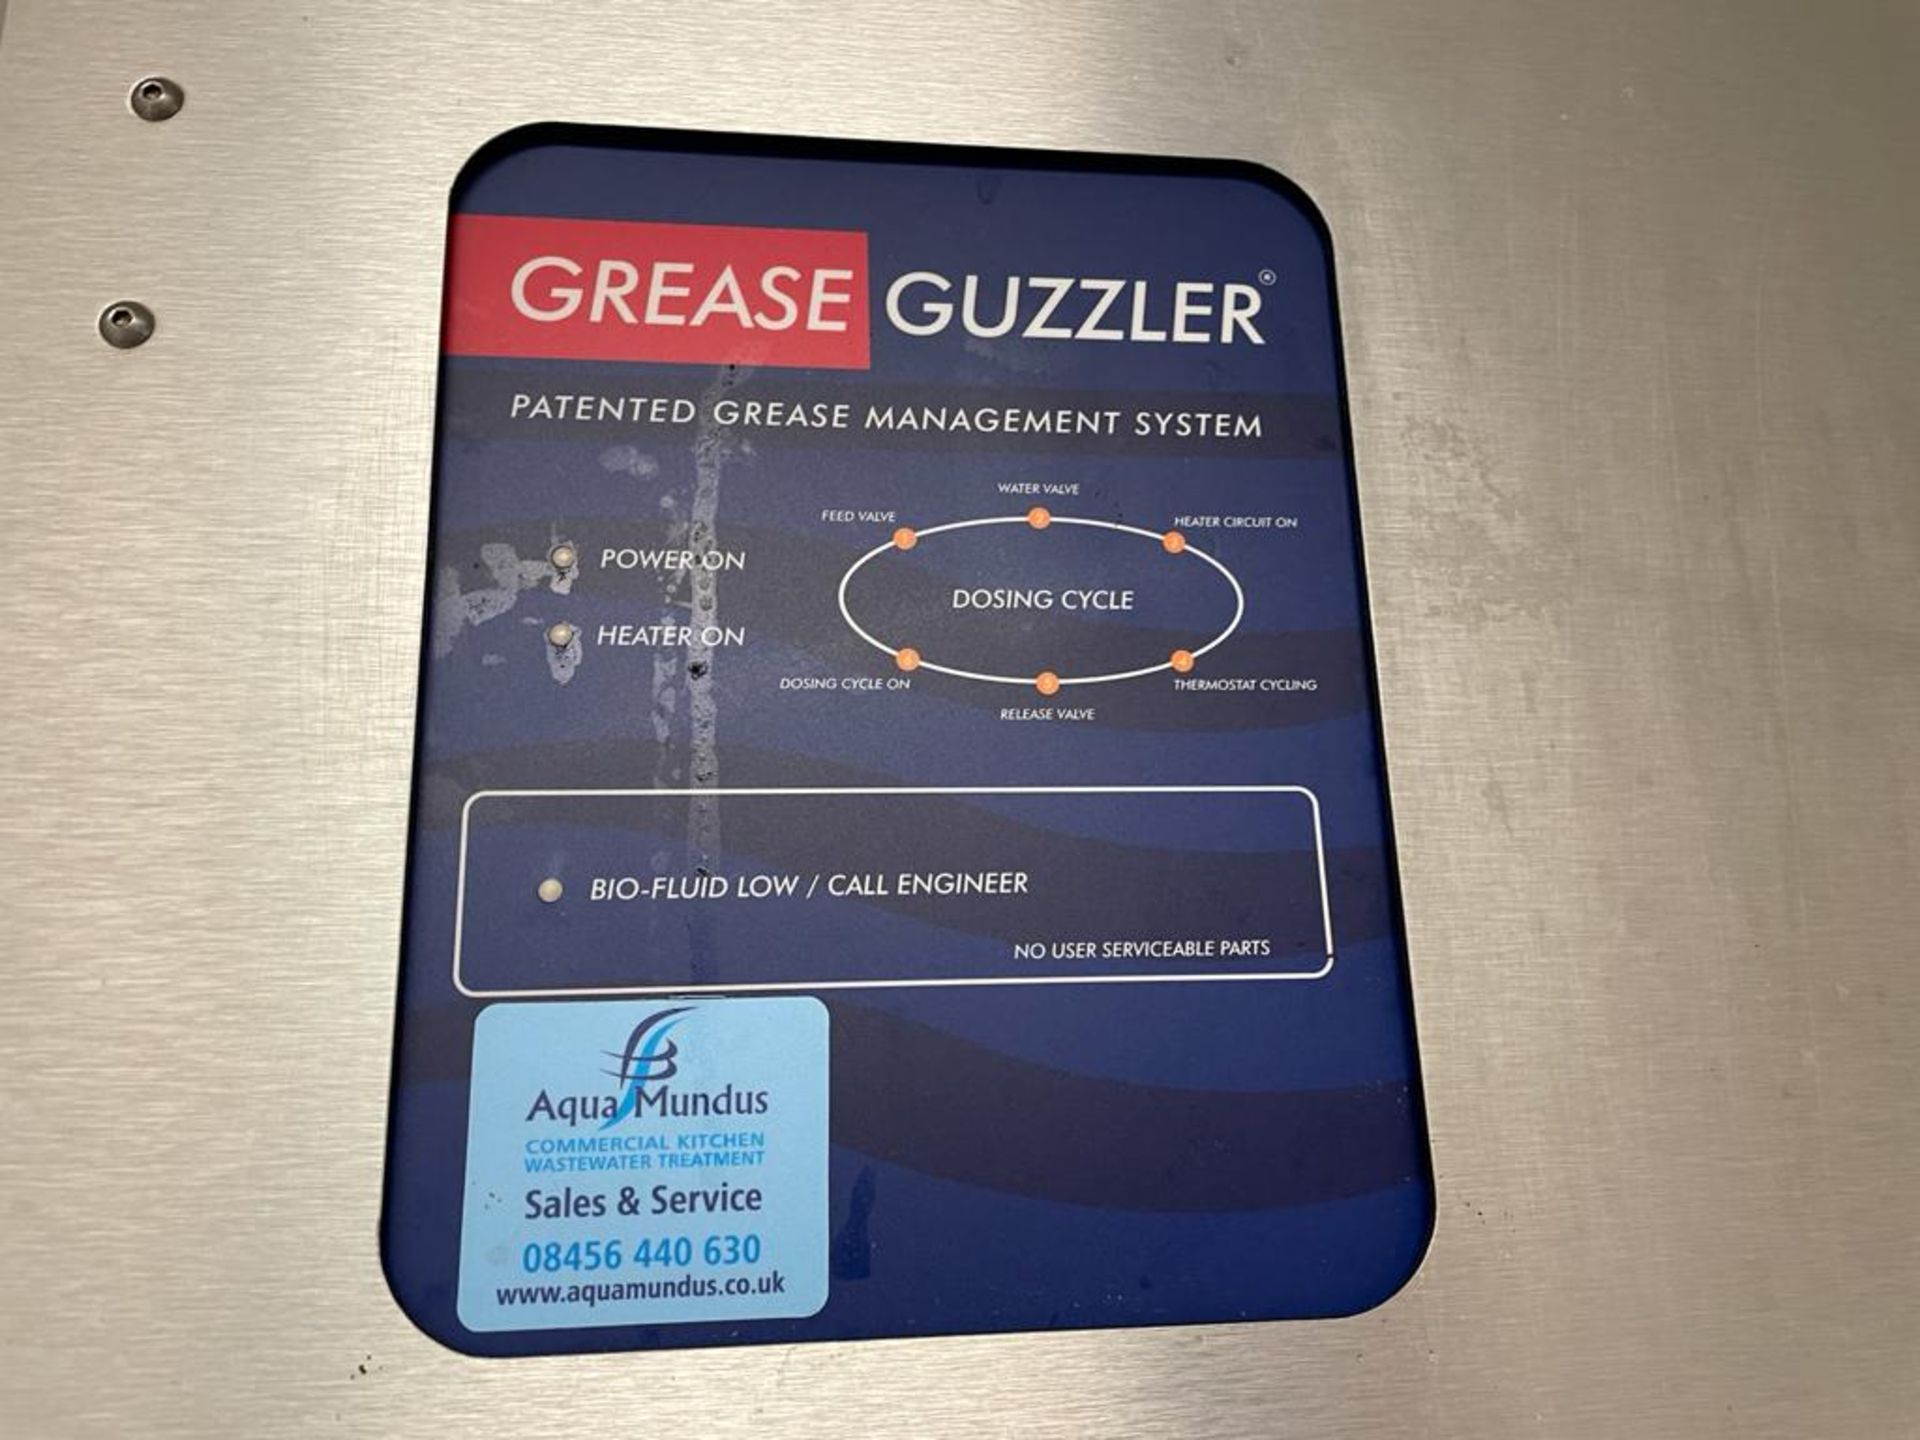 1 x Grease Guzzler - Patented Grease Management System - Model Number DD-620-041 - CL666 - Location: - Image 4 of 5